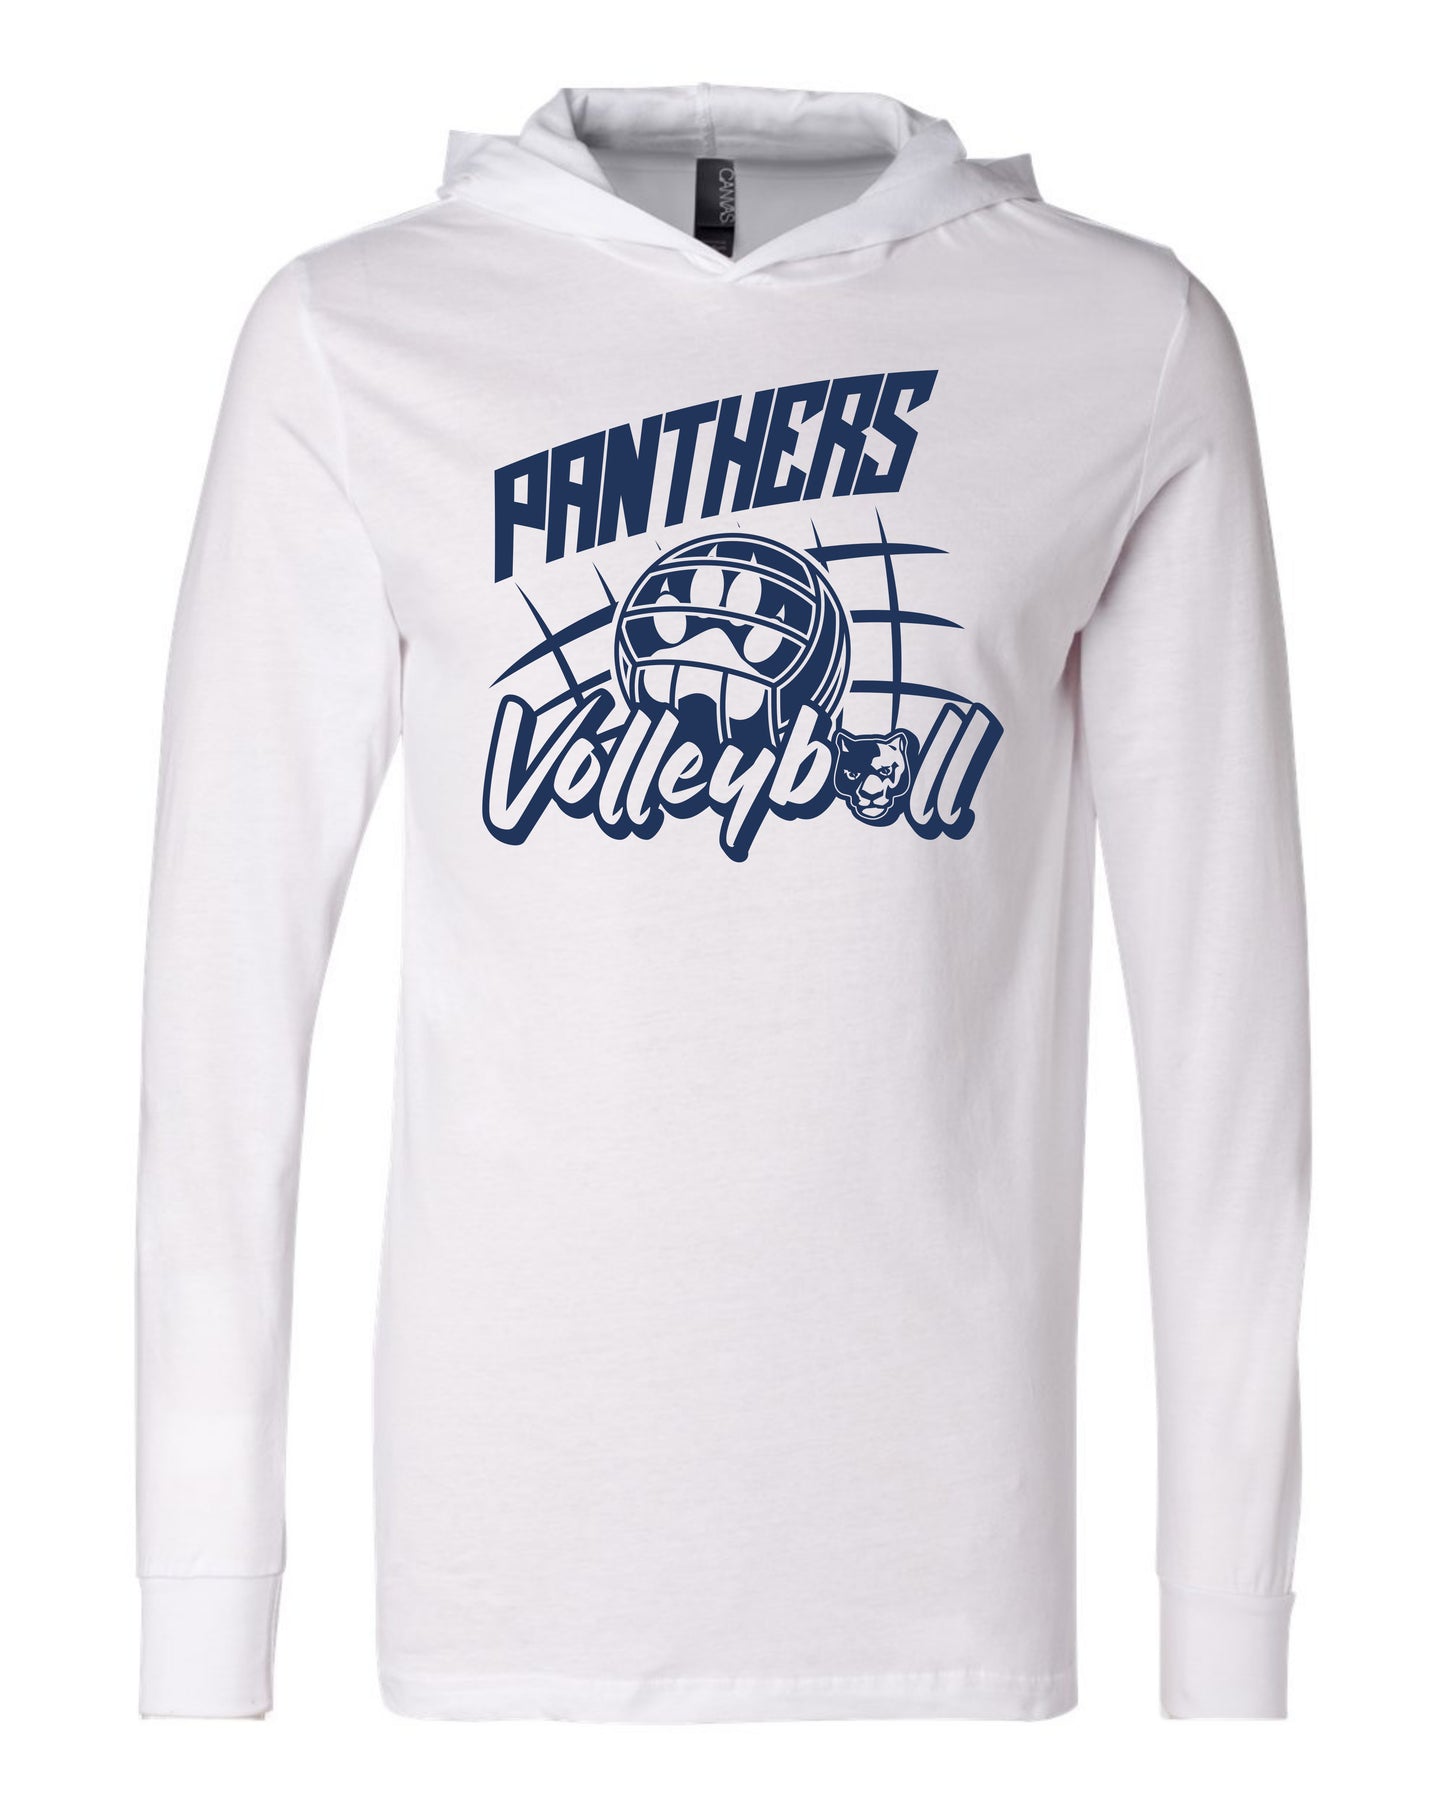 Panthers Volleyball Paw Ball - Adult Hooded Long Sleeve